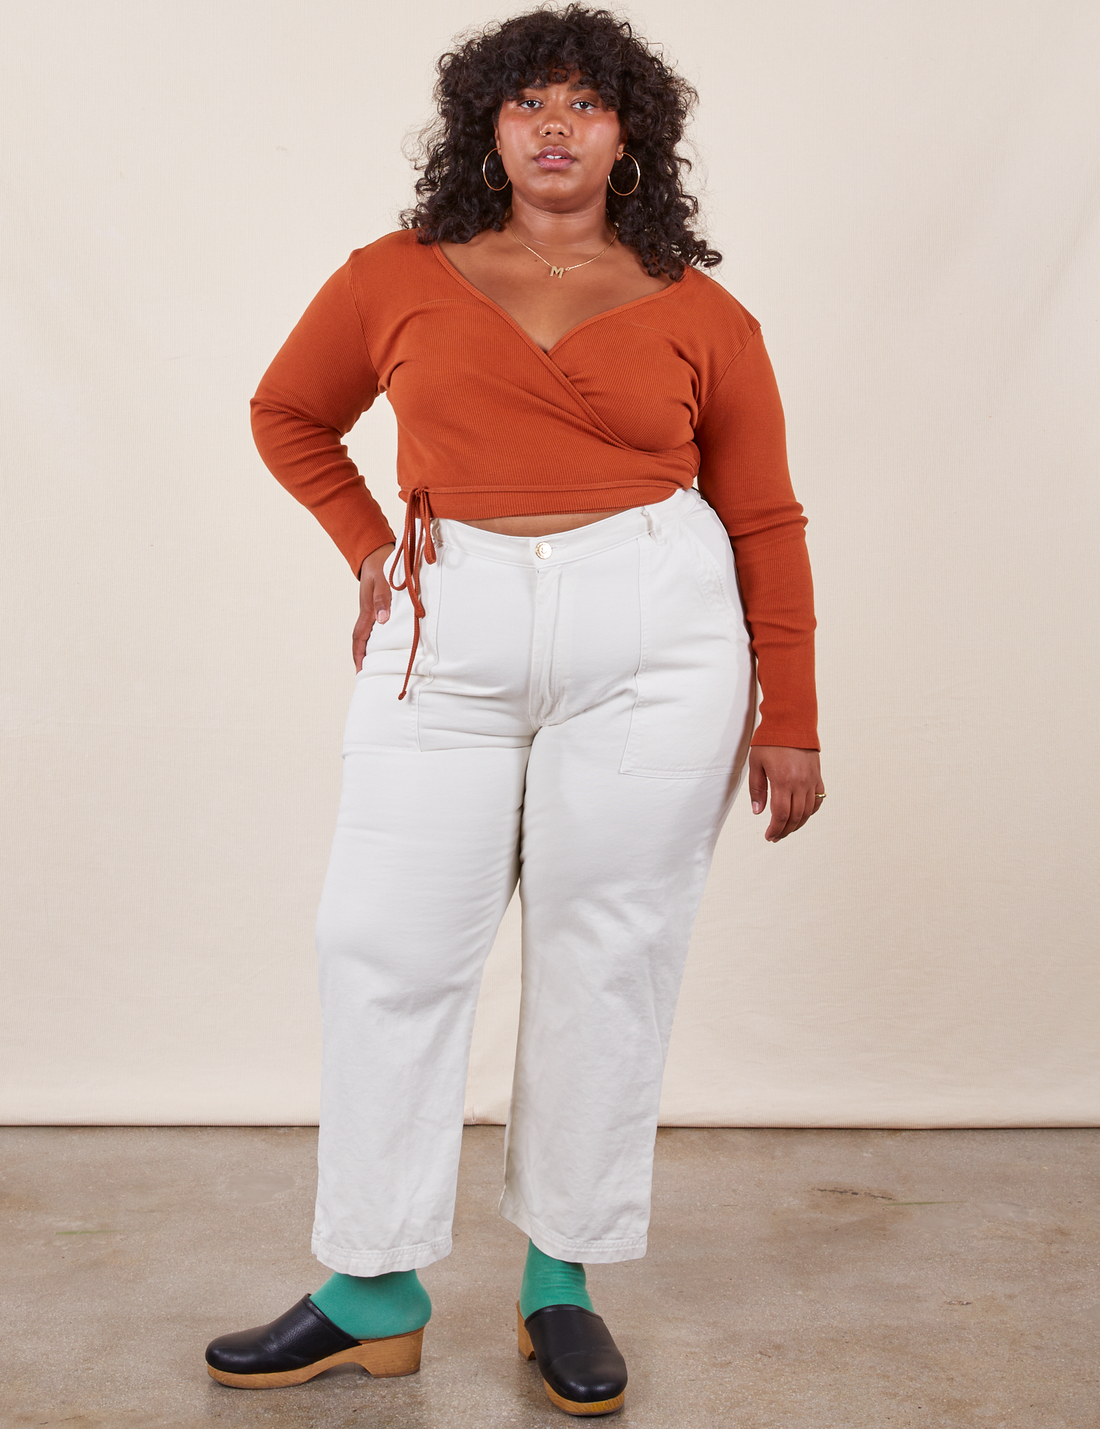 Morgan is 5'5" and wearing Petite 1XL Work Pants in Vintage Off-White paired with burnt terracotta Wrap Top